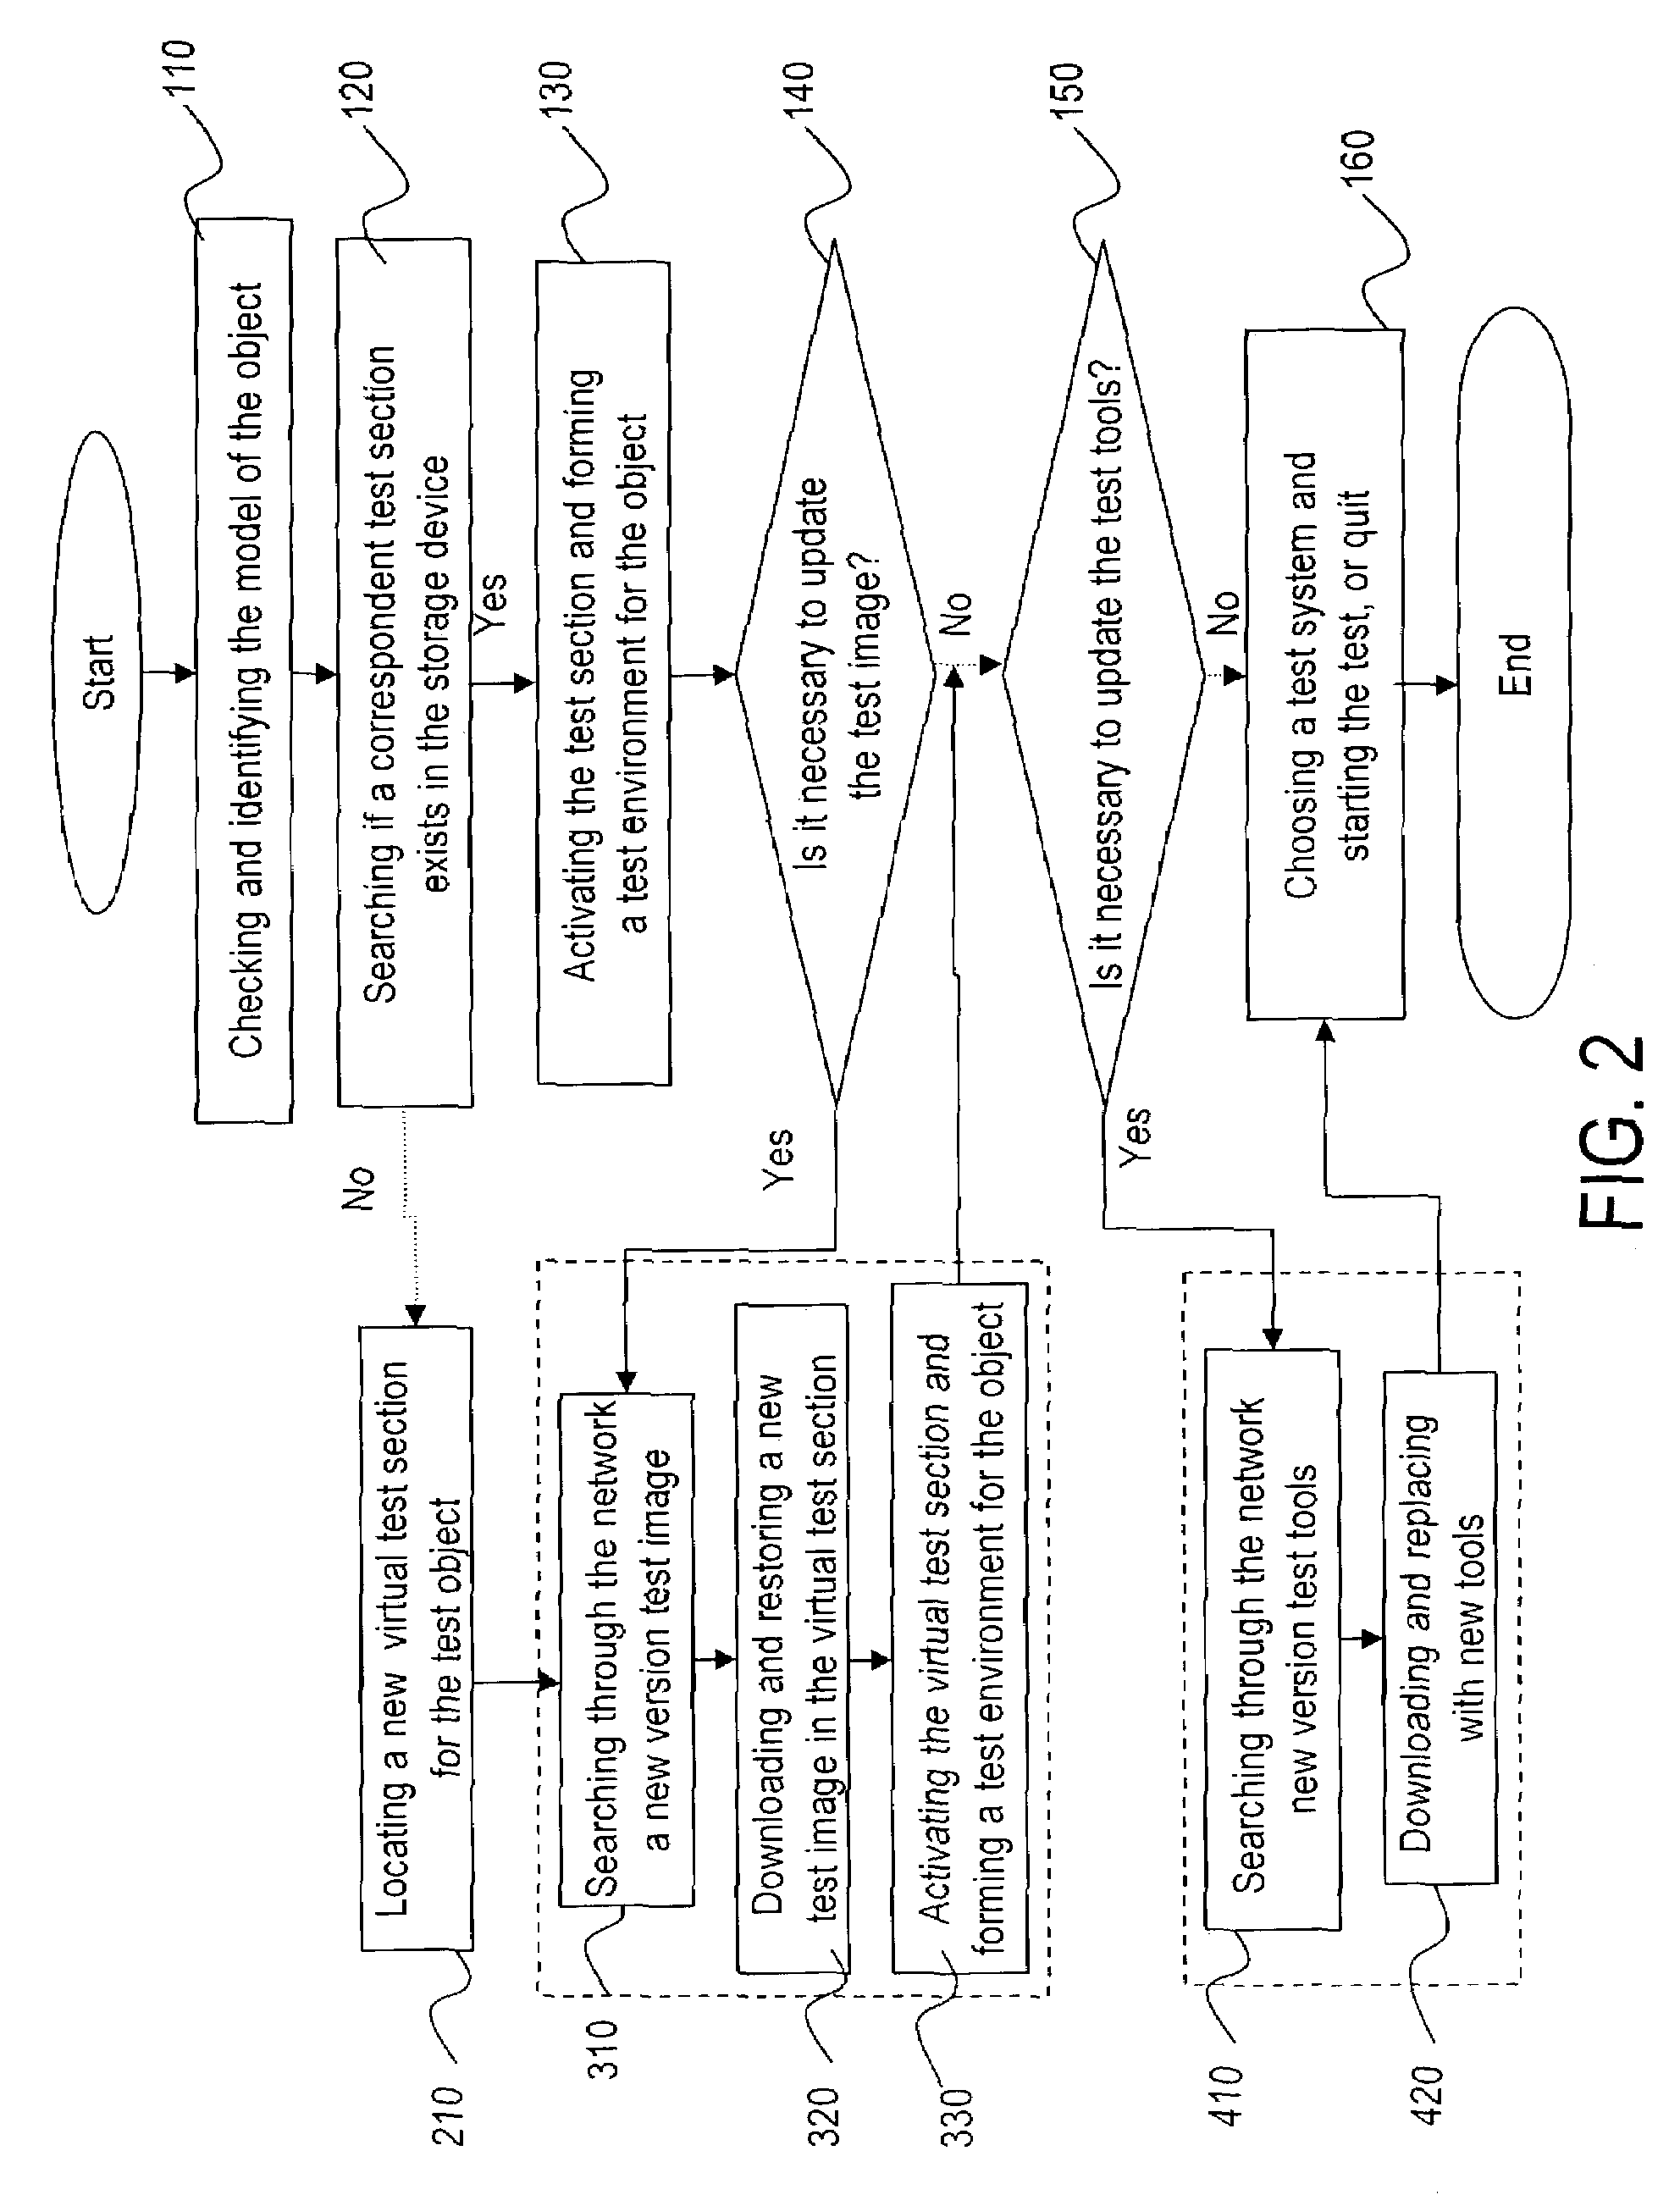 System and method for performing product tests utilizing a single storage device